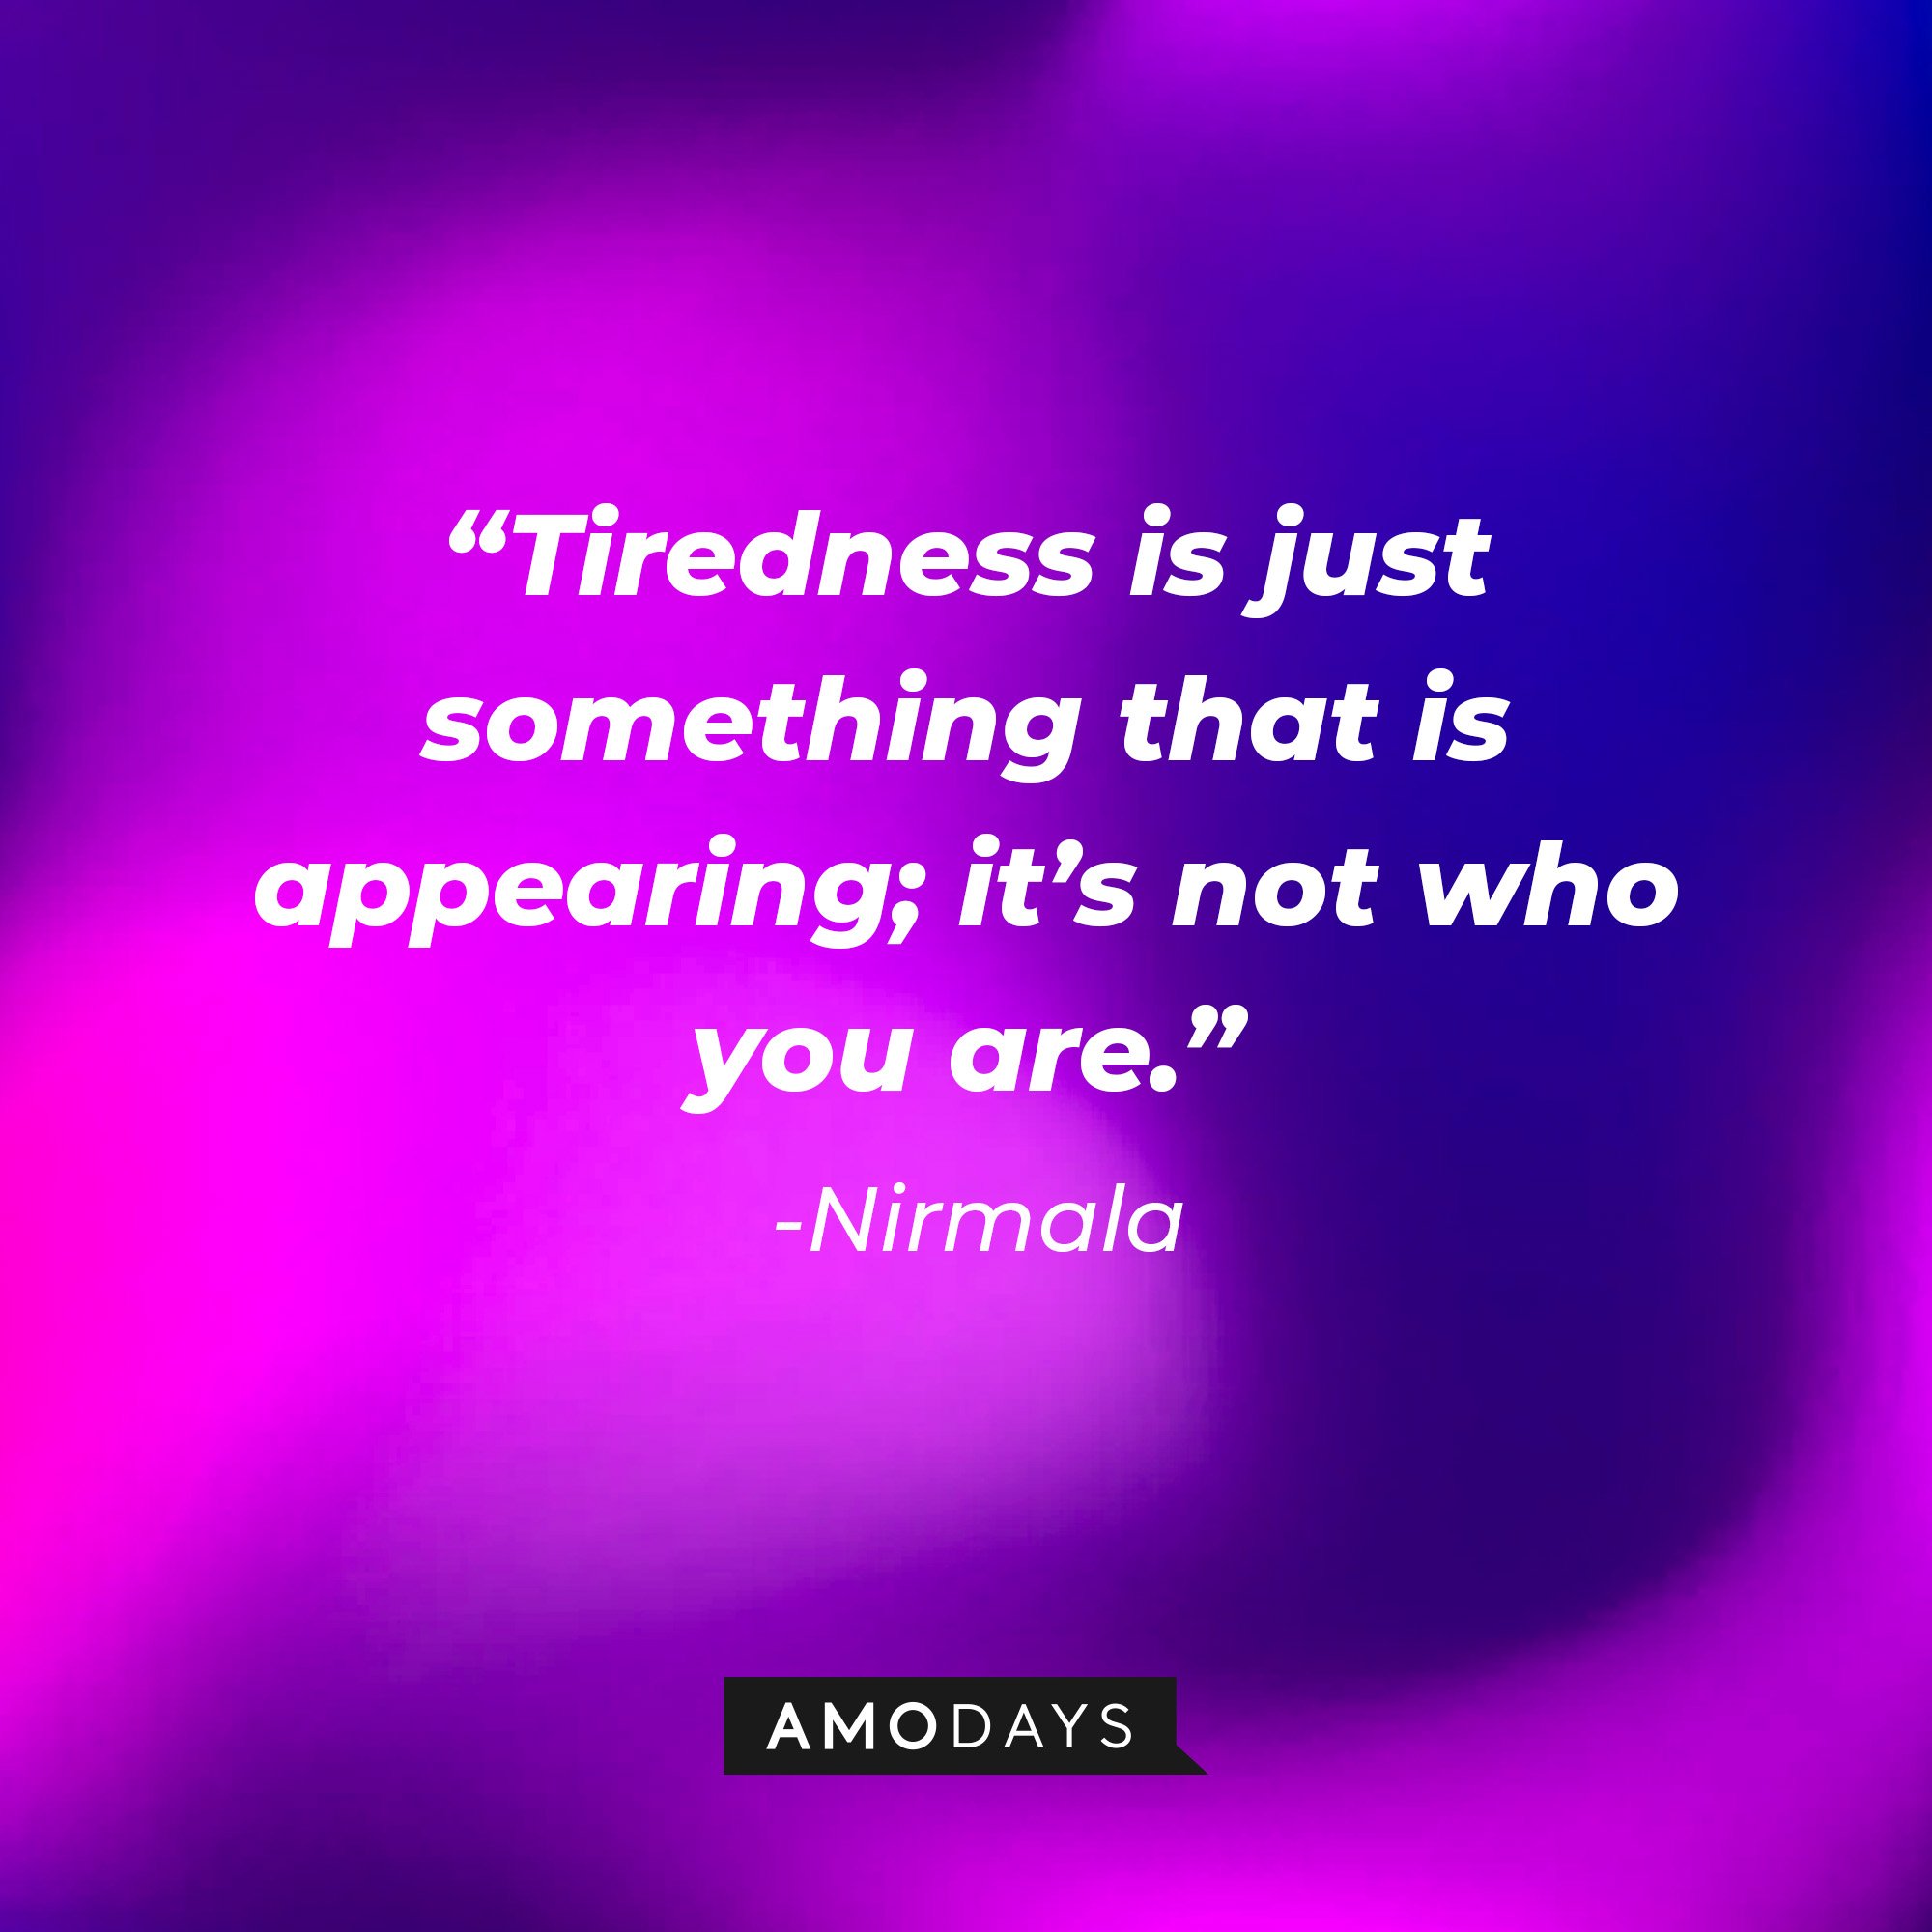 Nirmala's quote: “Tiredness is just something that is appearing; it’s not who you are.” —| Image: AmoDays